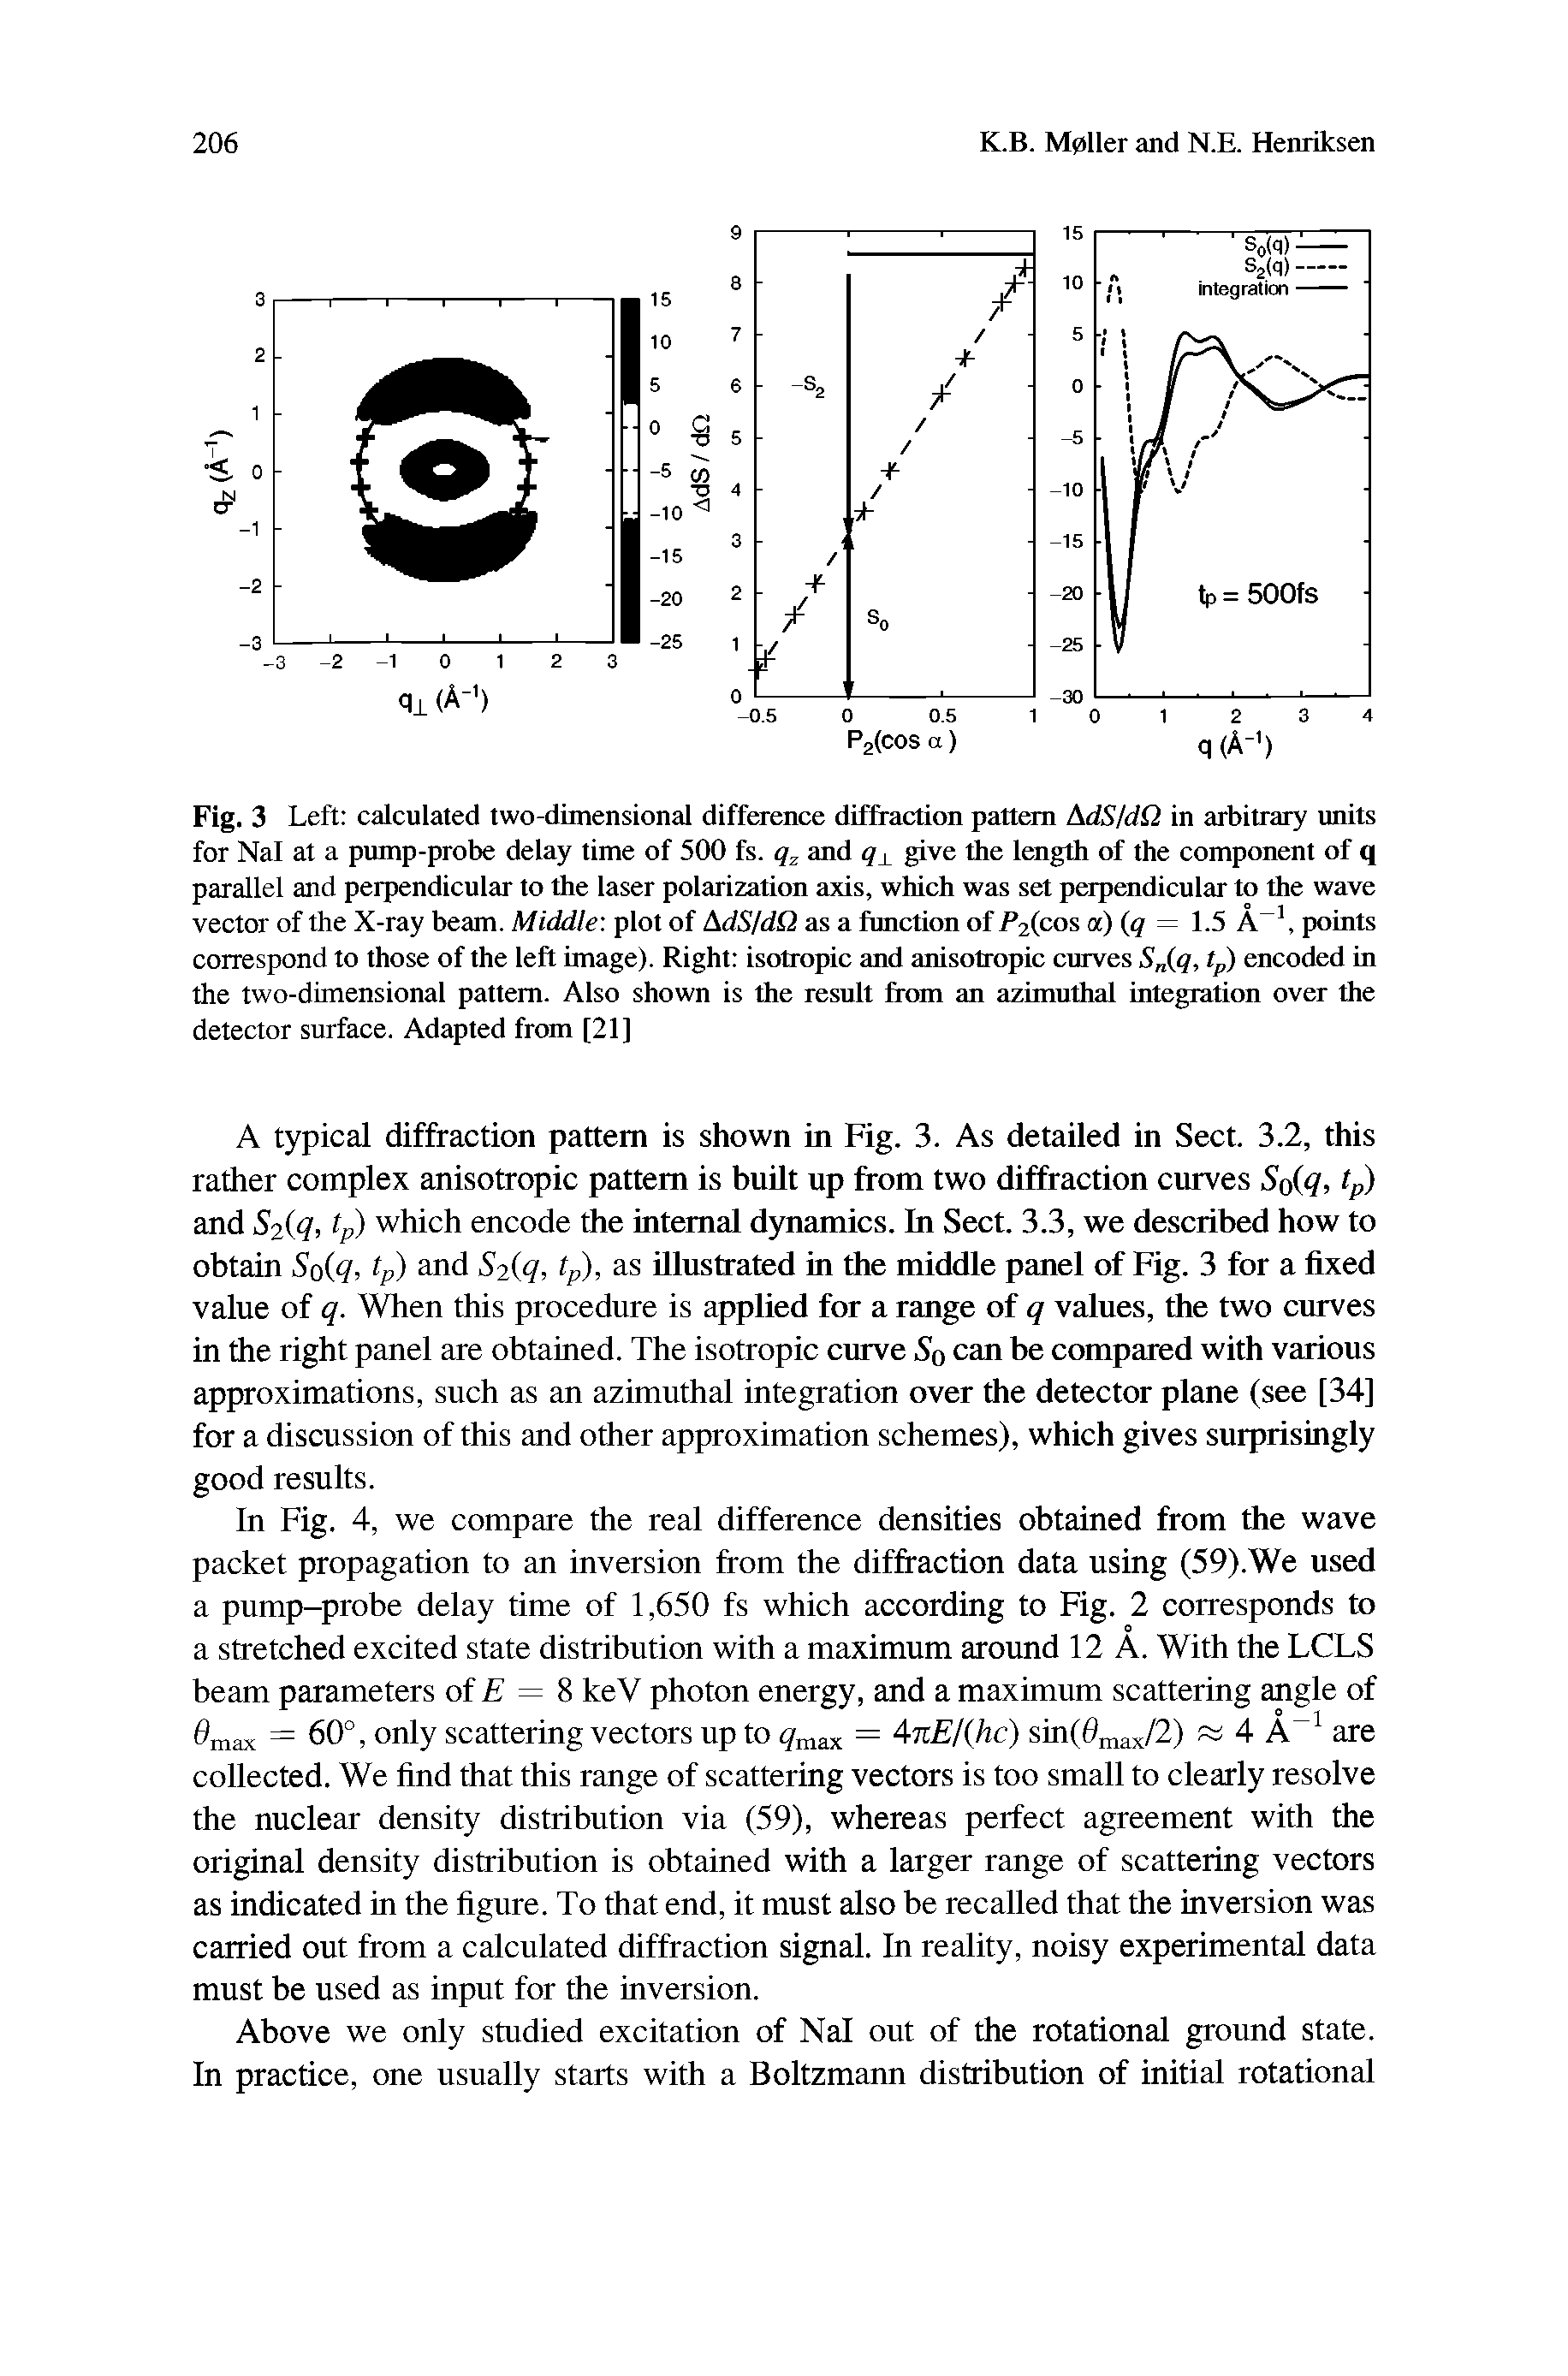 Fig. 3 Left calculated two-dimensional difference diffraction pattern AdS/dQ in arbitrary units for Nal at a pump-probe delay time of 500 fs. qy and q give the length of the component of q parallel and perpendicular to the laser polarization axis, which was set perpendicular to the wave vector of the X-ray beam. Middle plot of AdS/dQ as a function of P2(cos a) (q = 1.5 A-1, points correspond to those of the left image). Right isotropic and anisotropic curves Sn(q, tp) encoded in the two-dimensional pattern. Also shown is the result from an azimuthal integration over the detector surface. Adapted from [21]...